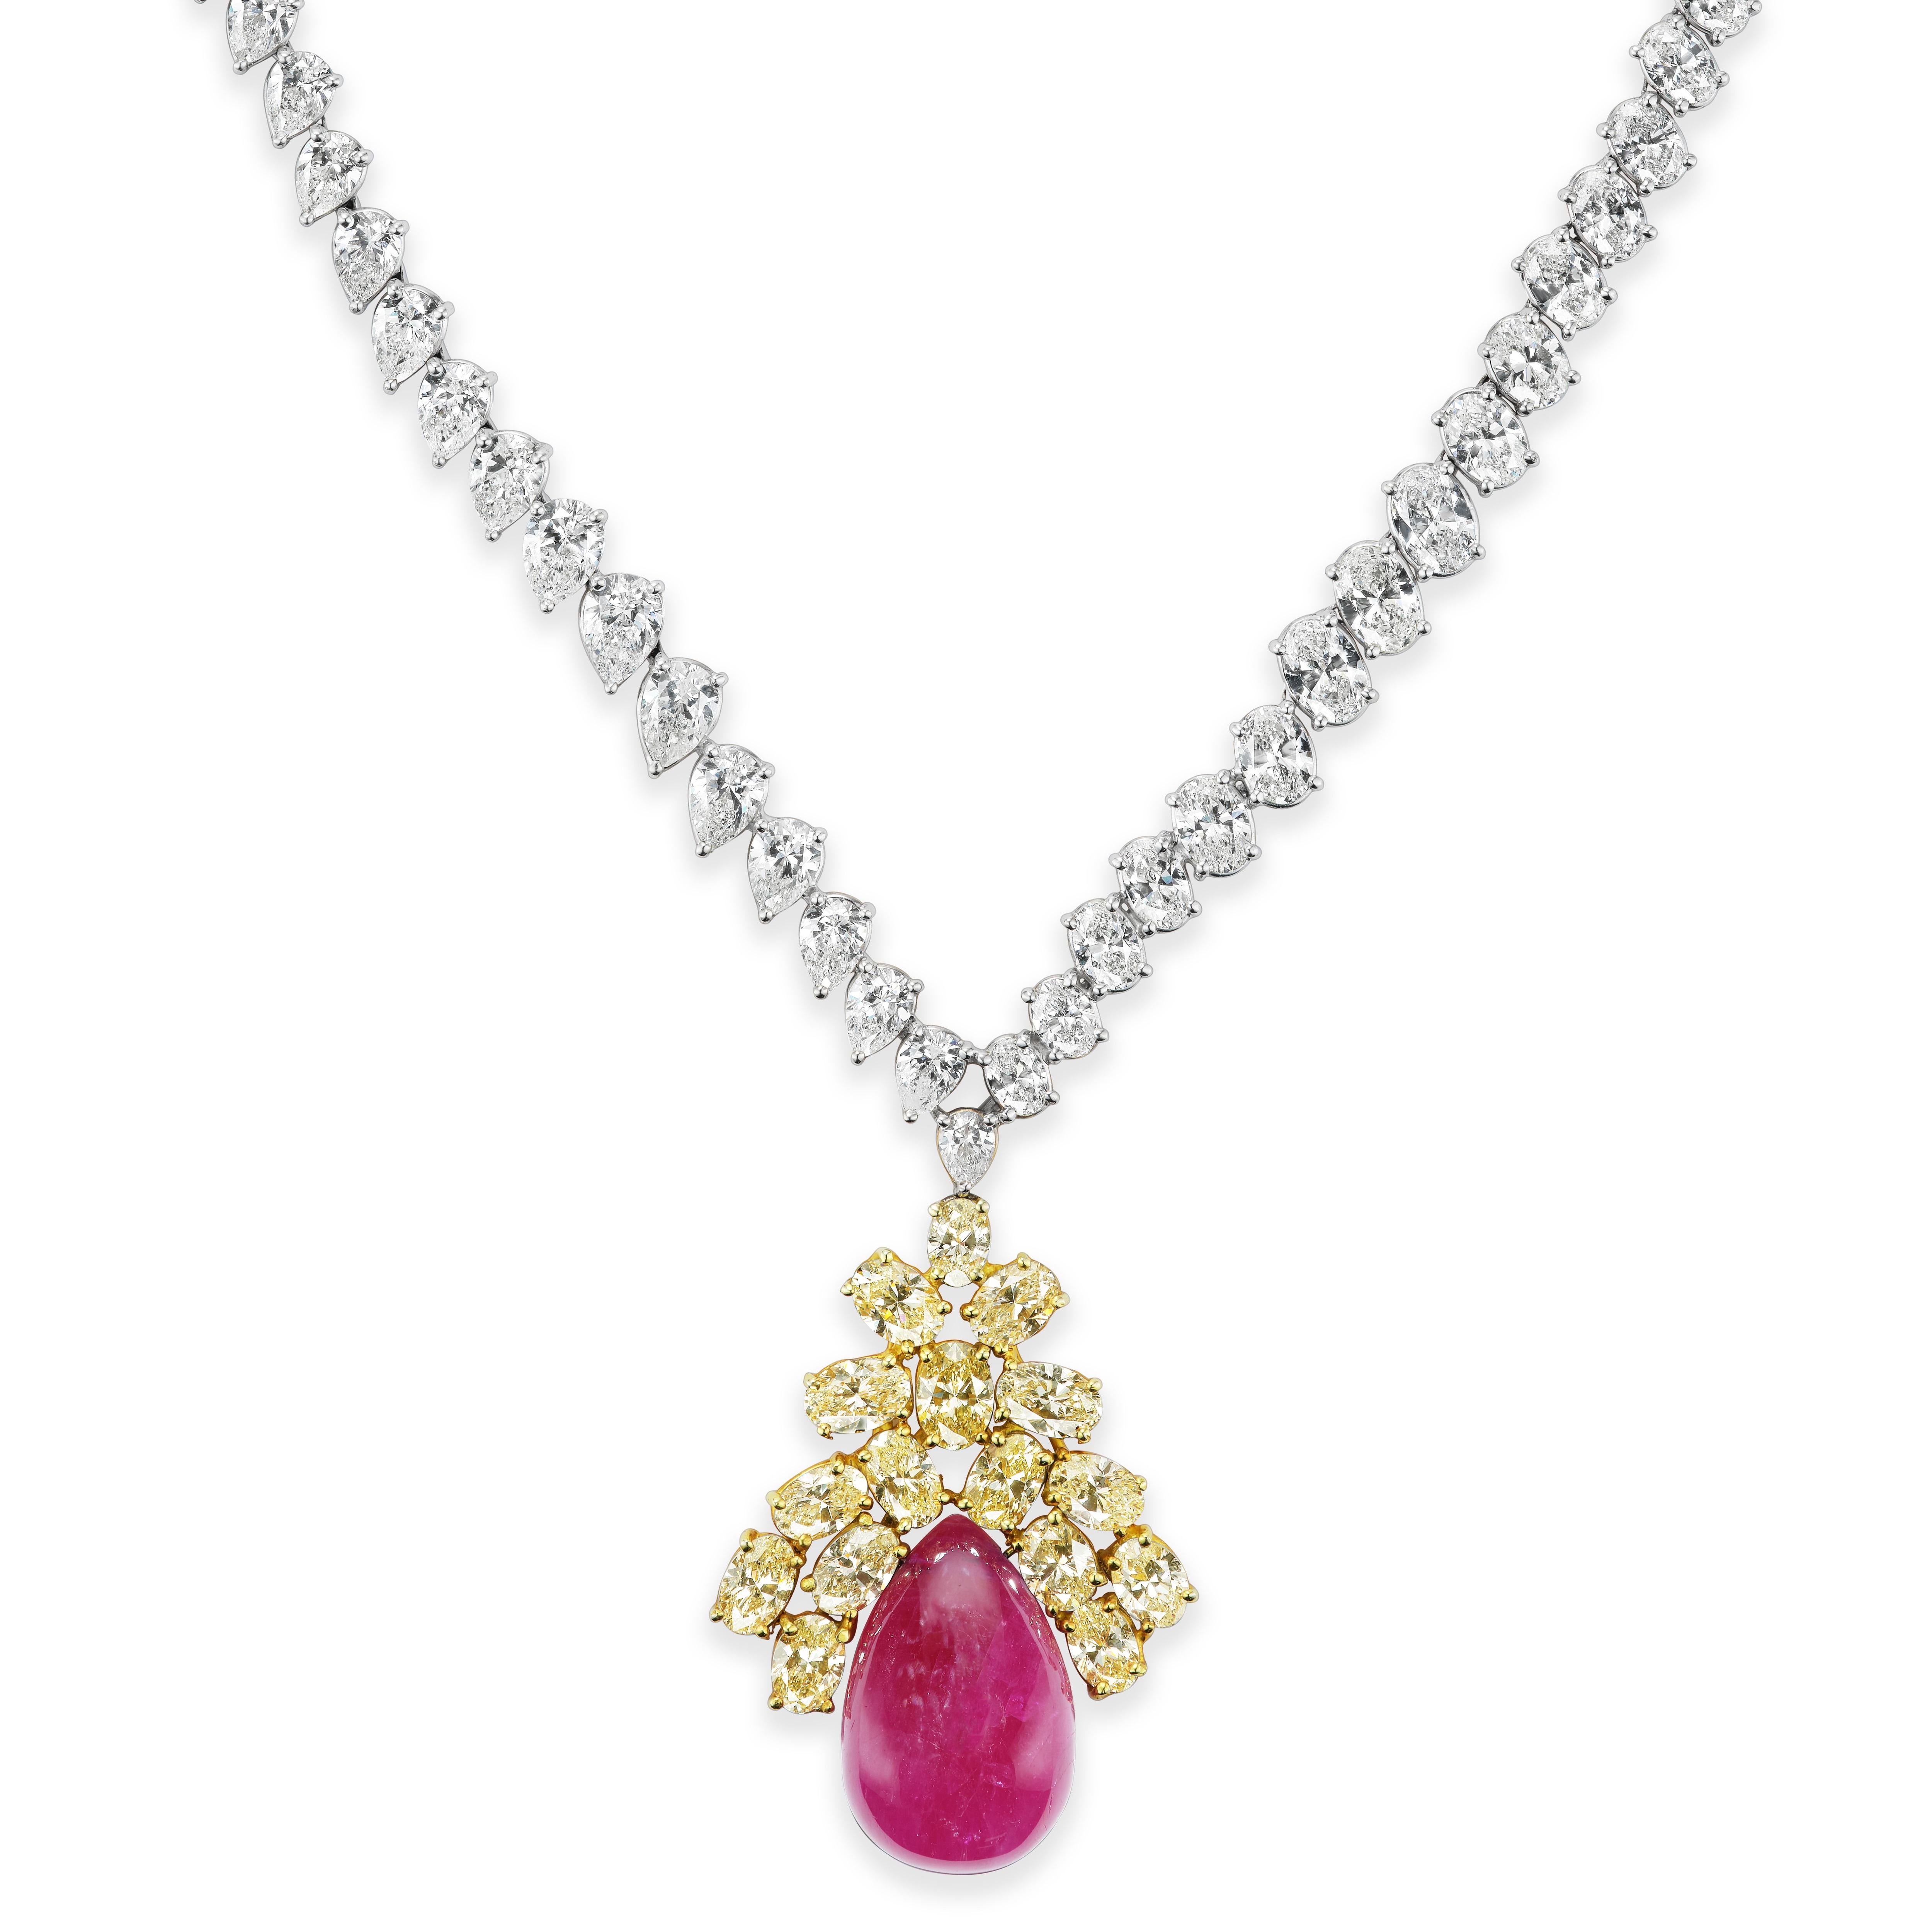 Contemporary Beauvince Bloom Necklace & Earrings Suite (150.45 ct Rubies & Diamonds) in Gold For Sale